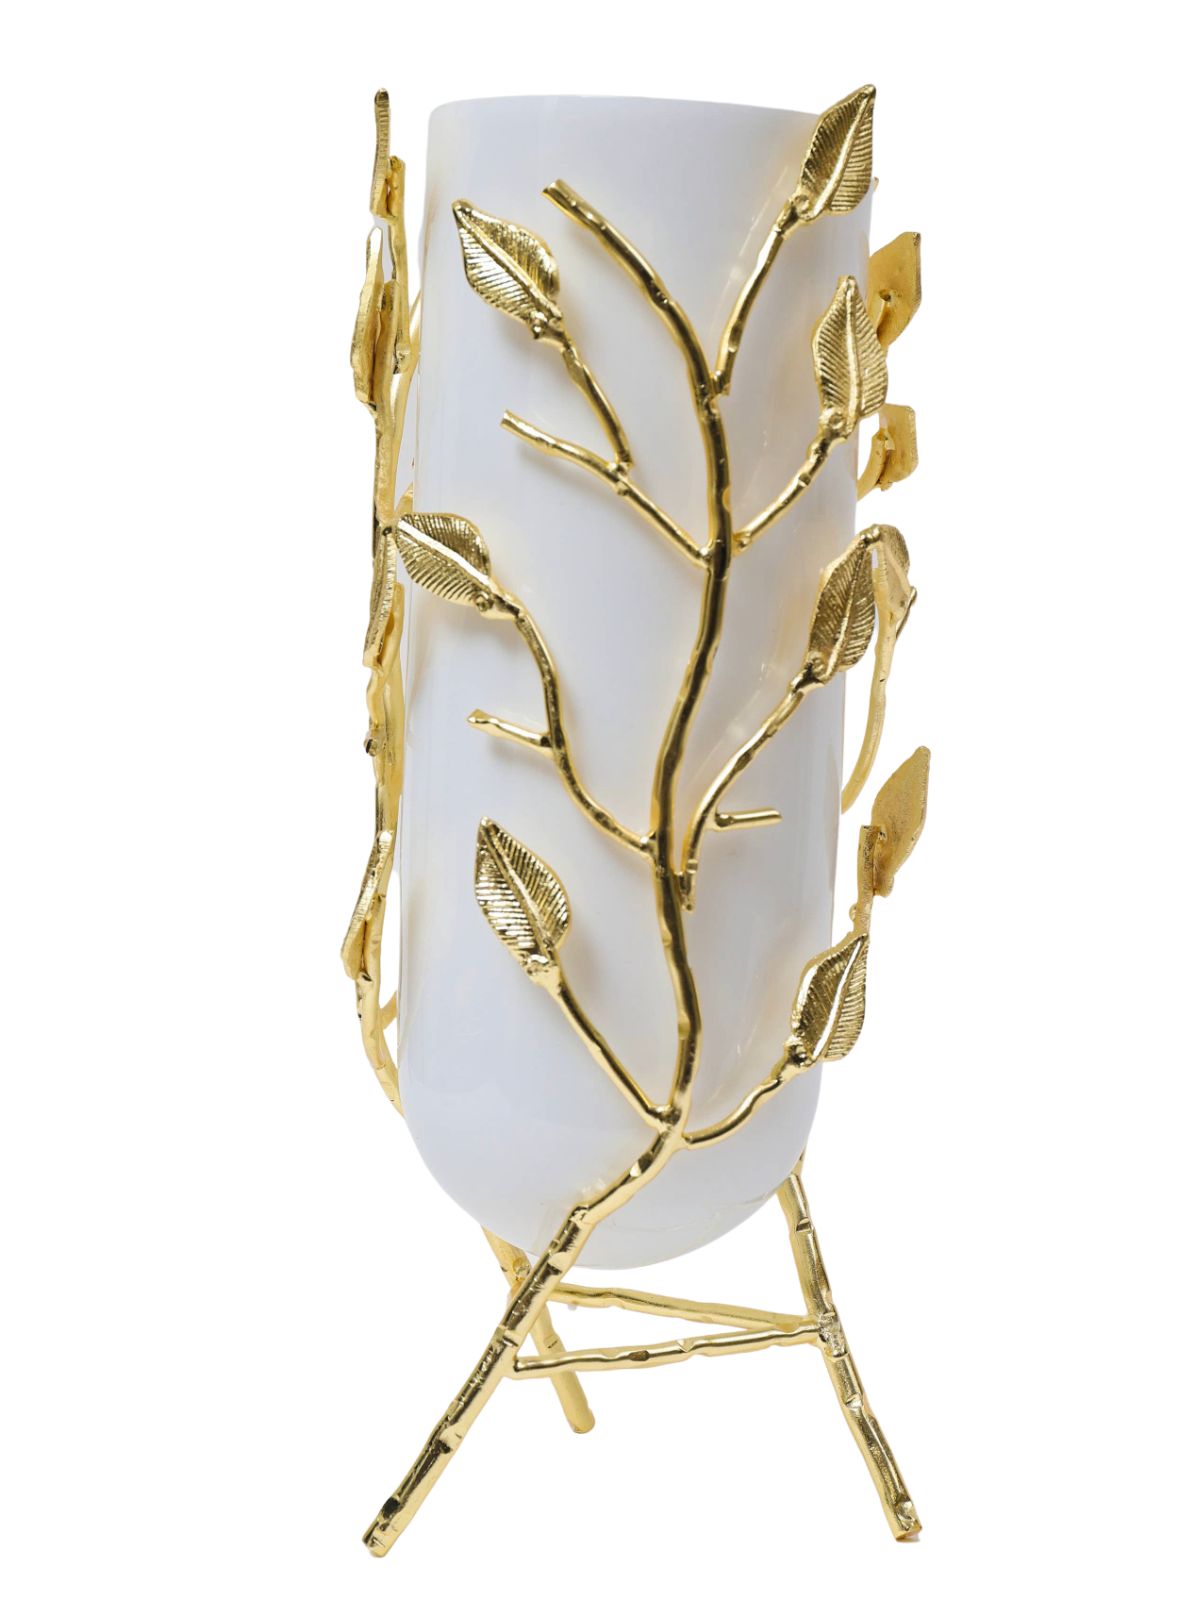 16H Gold Metal Branch Decorative Vase With Luxurious White Glass Insert - KYA Home Decor. 